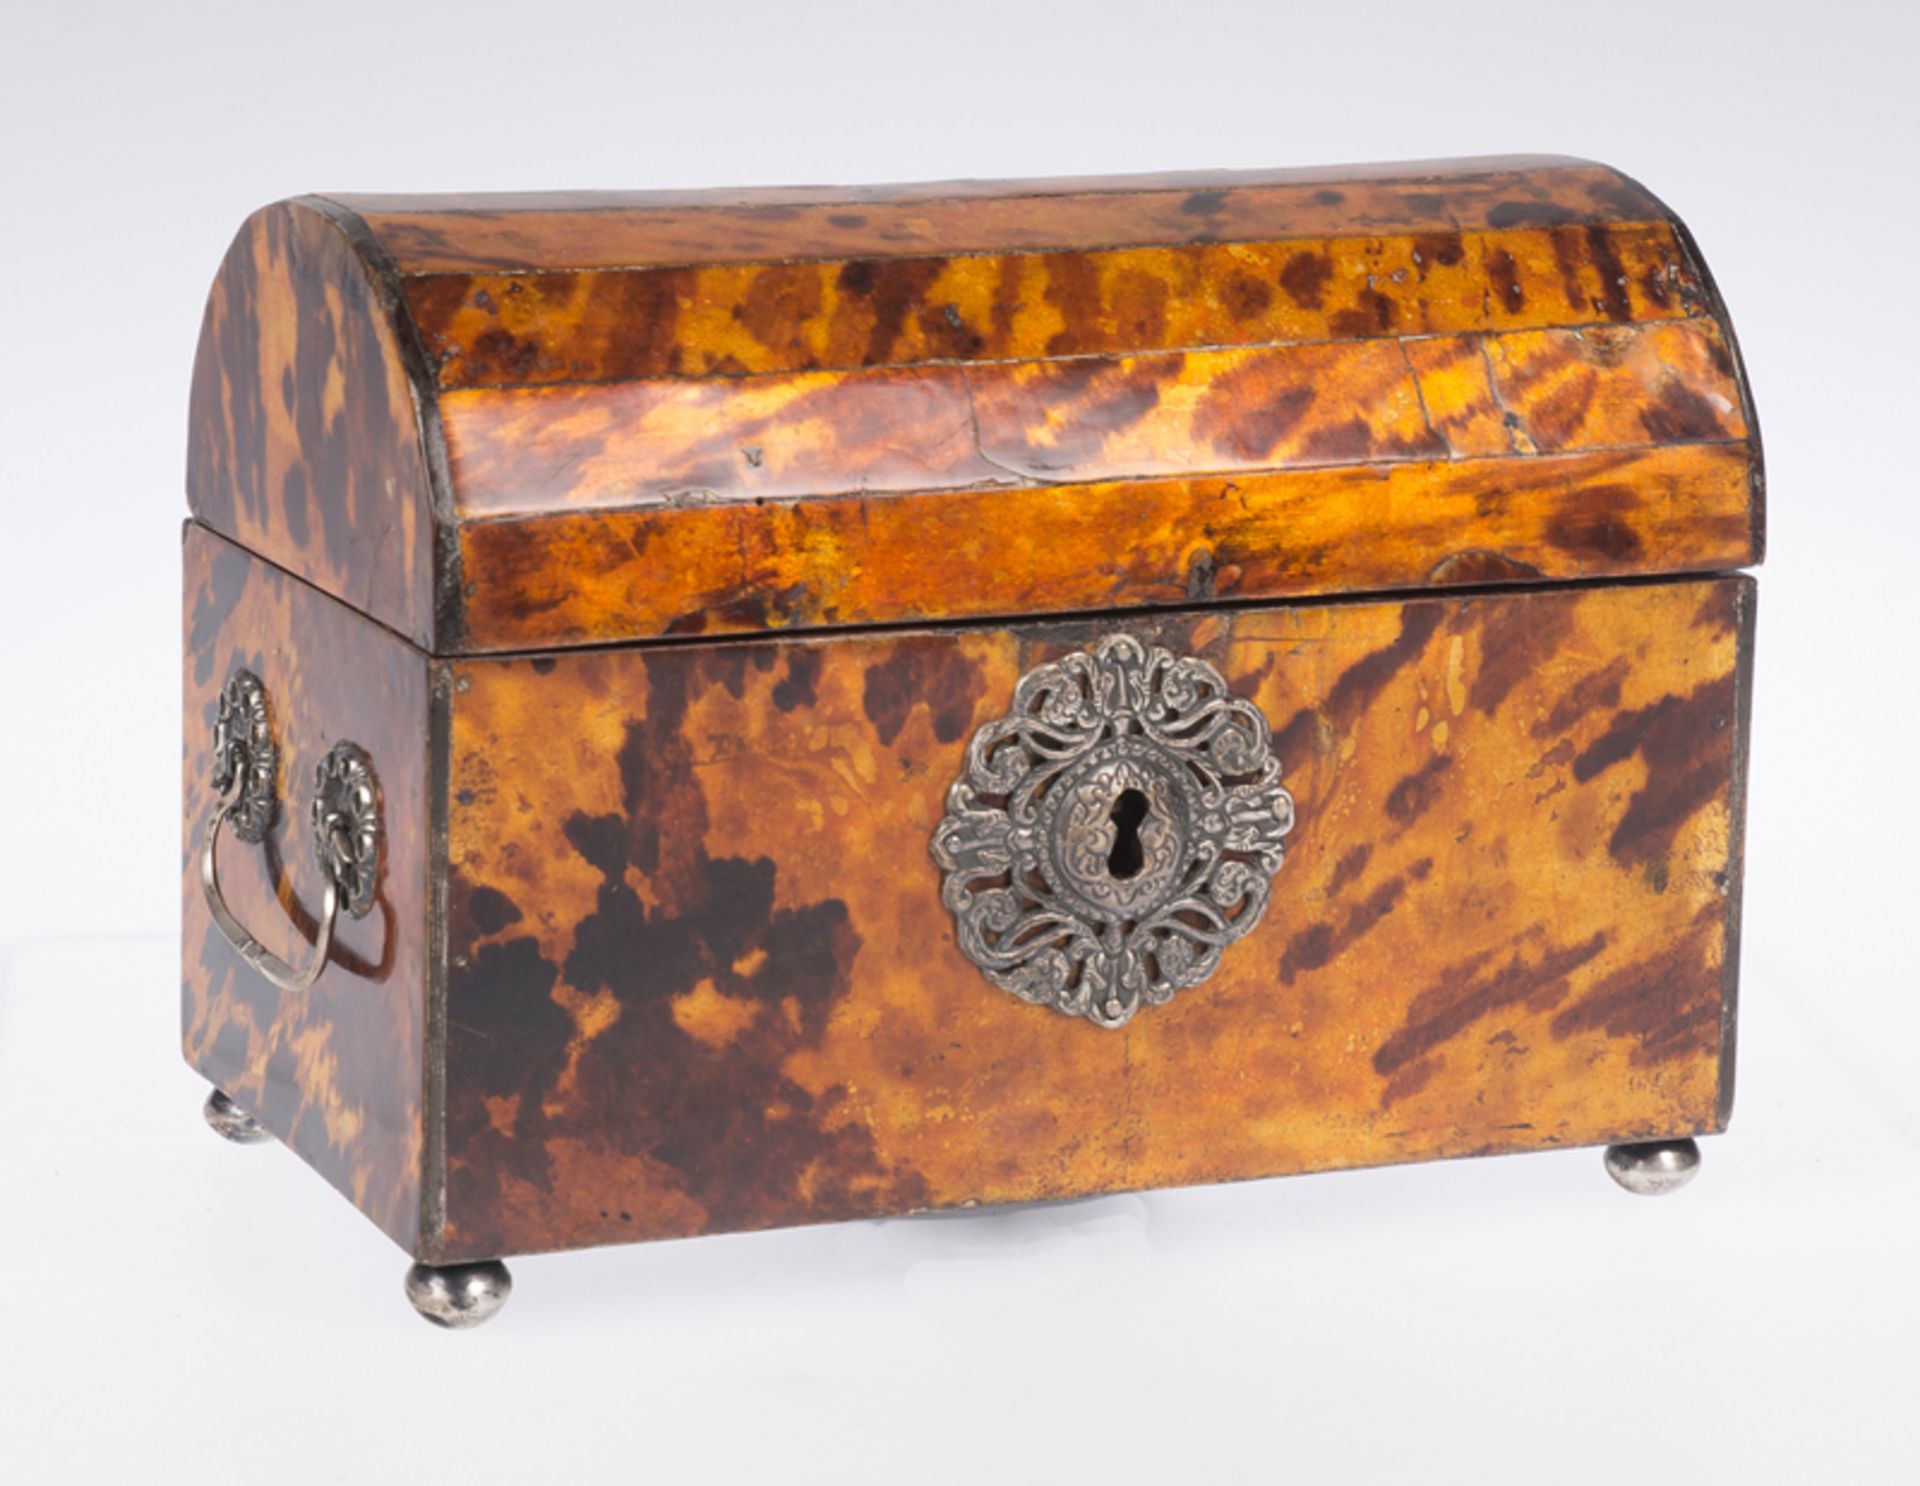 Wooden box covered in tortoiseshell. Colonial work. Mexico. 18th century Wooden box covered in